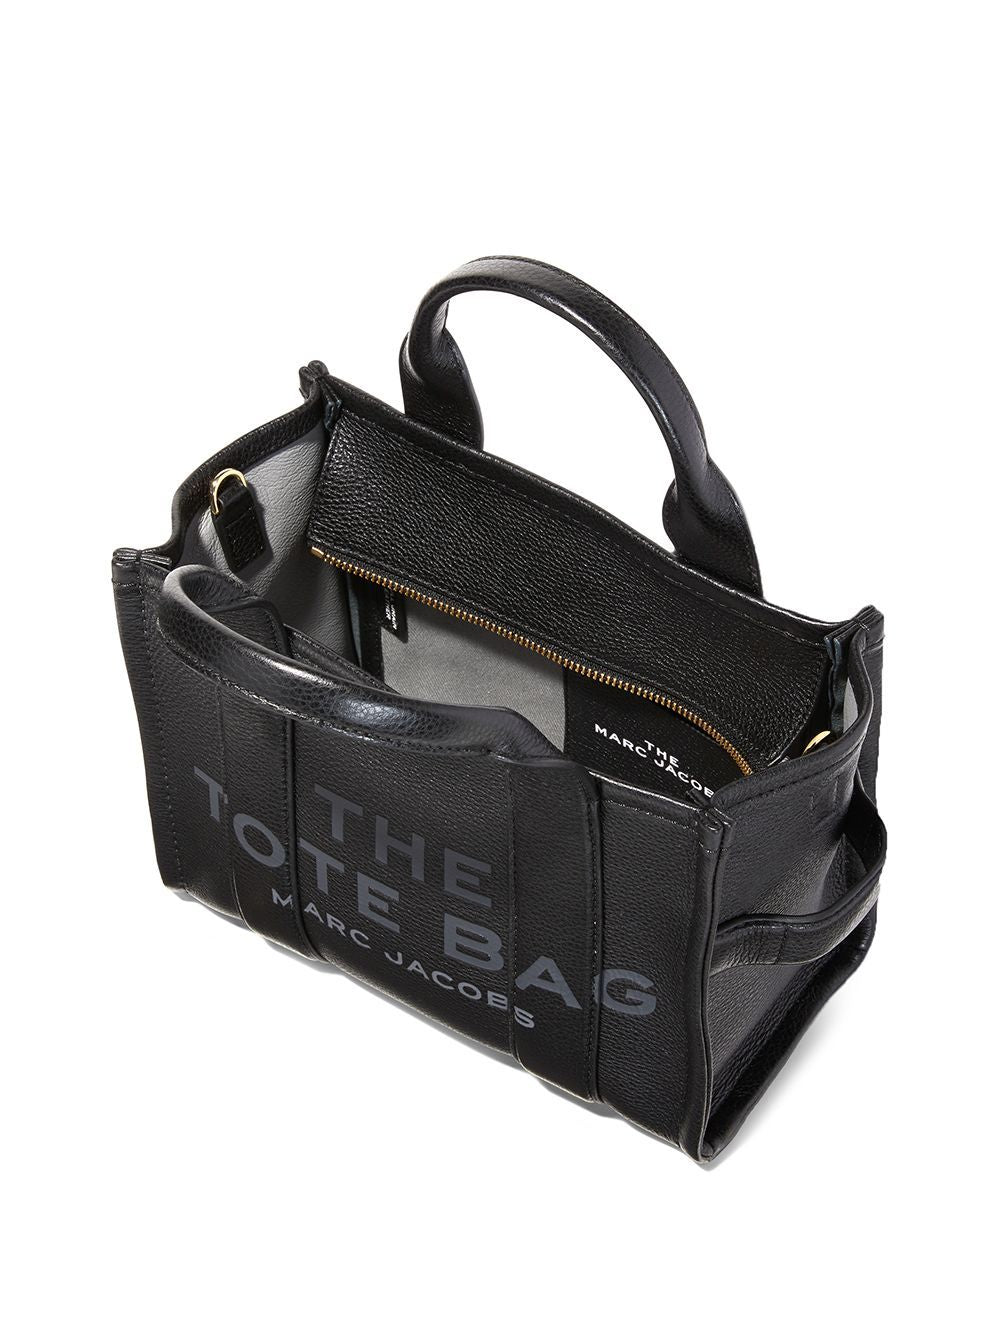 MARC JACOBS: The Tote Bag in leather - Black  Marc Jacobs mini bag  H009L01SP21 online at